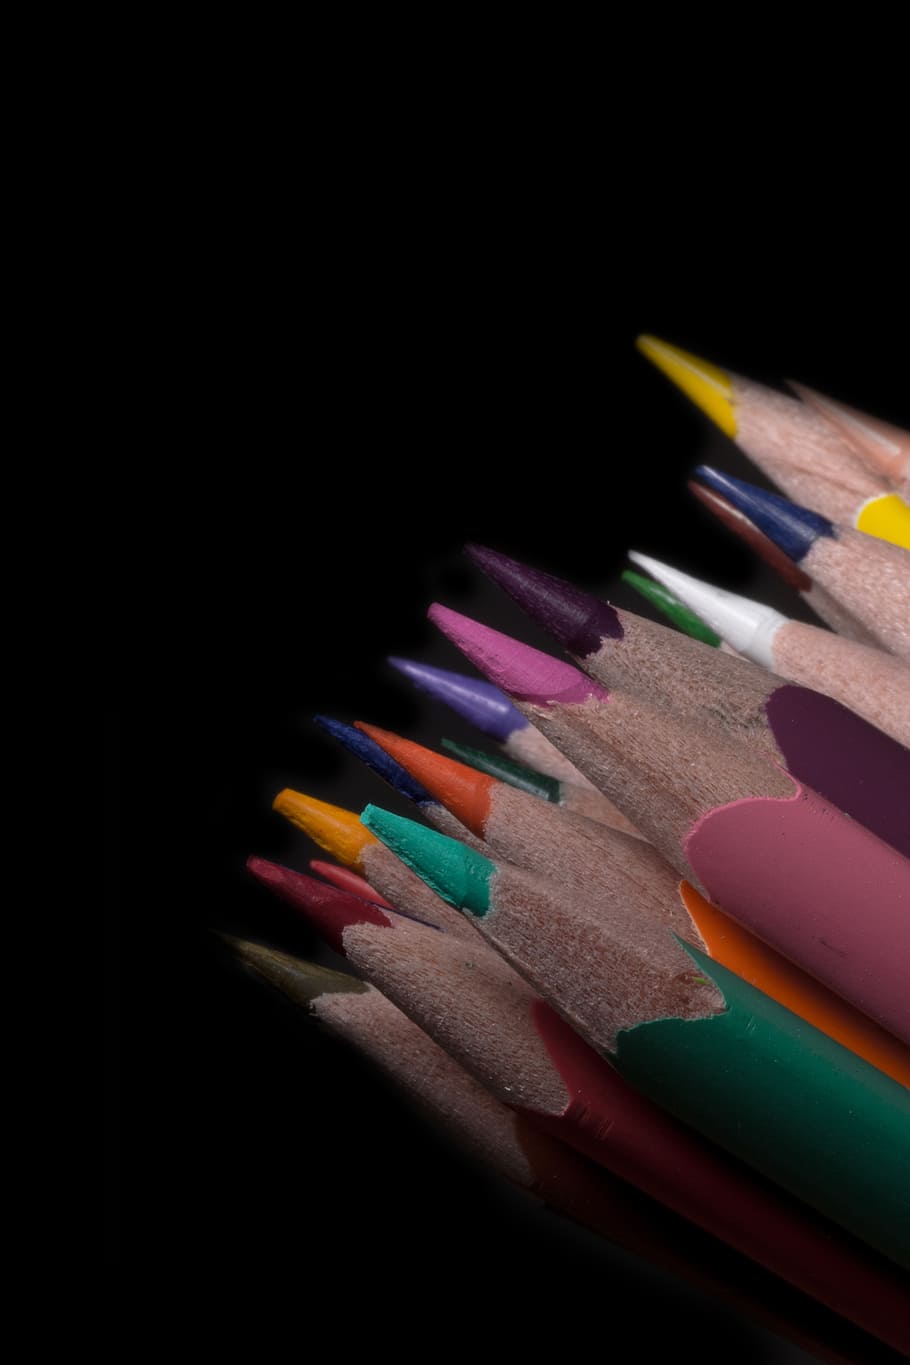 colored pencils, wooden pegs, pens, colorful, paint, school, HD wallpaper